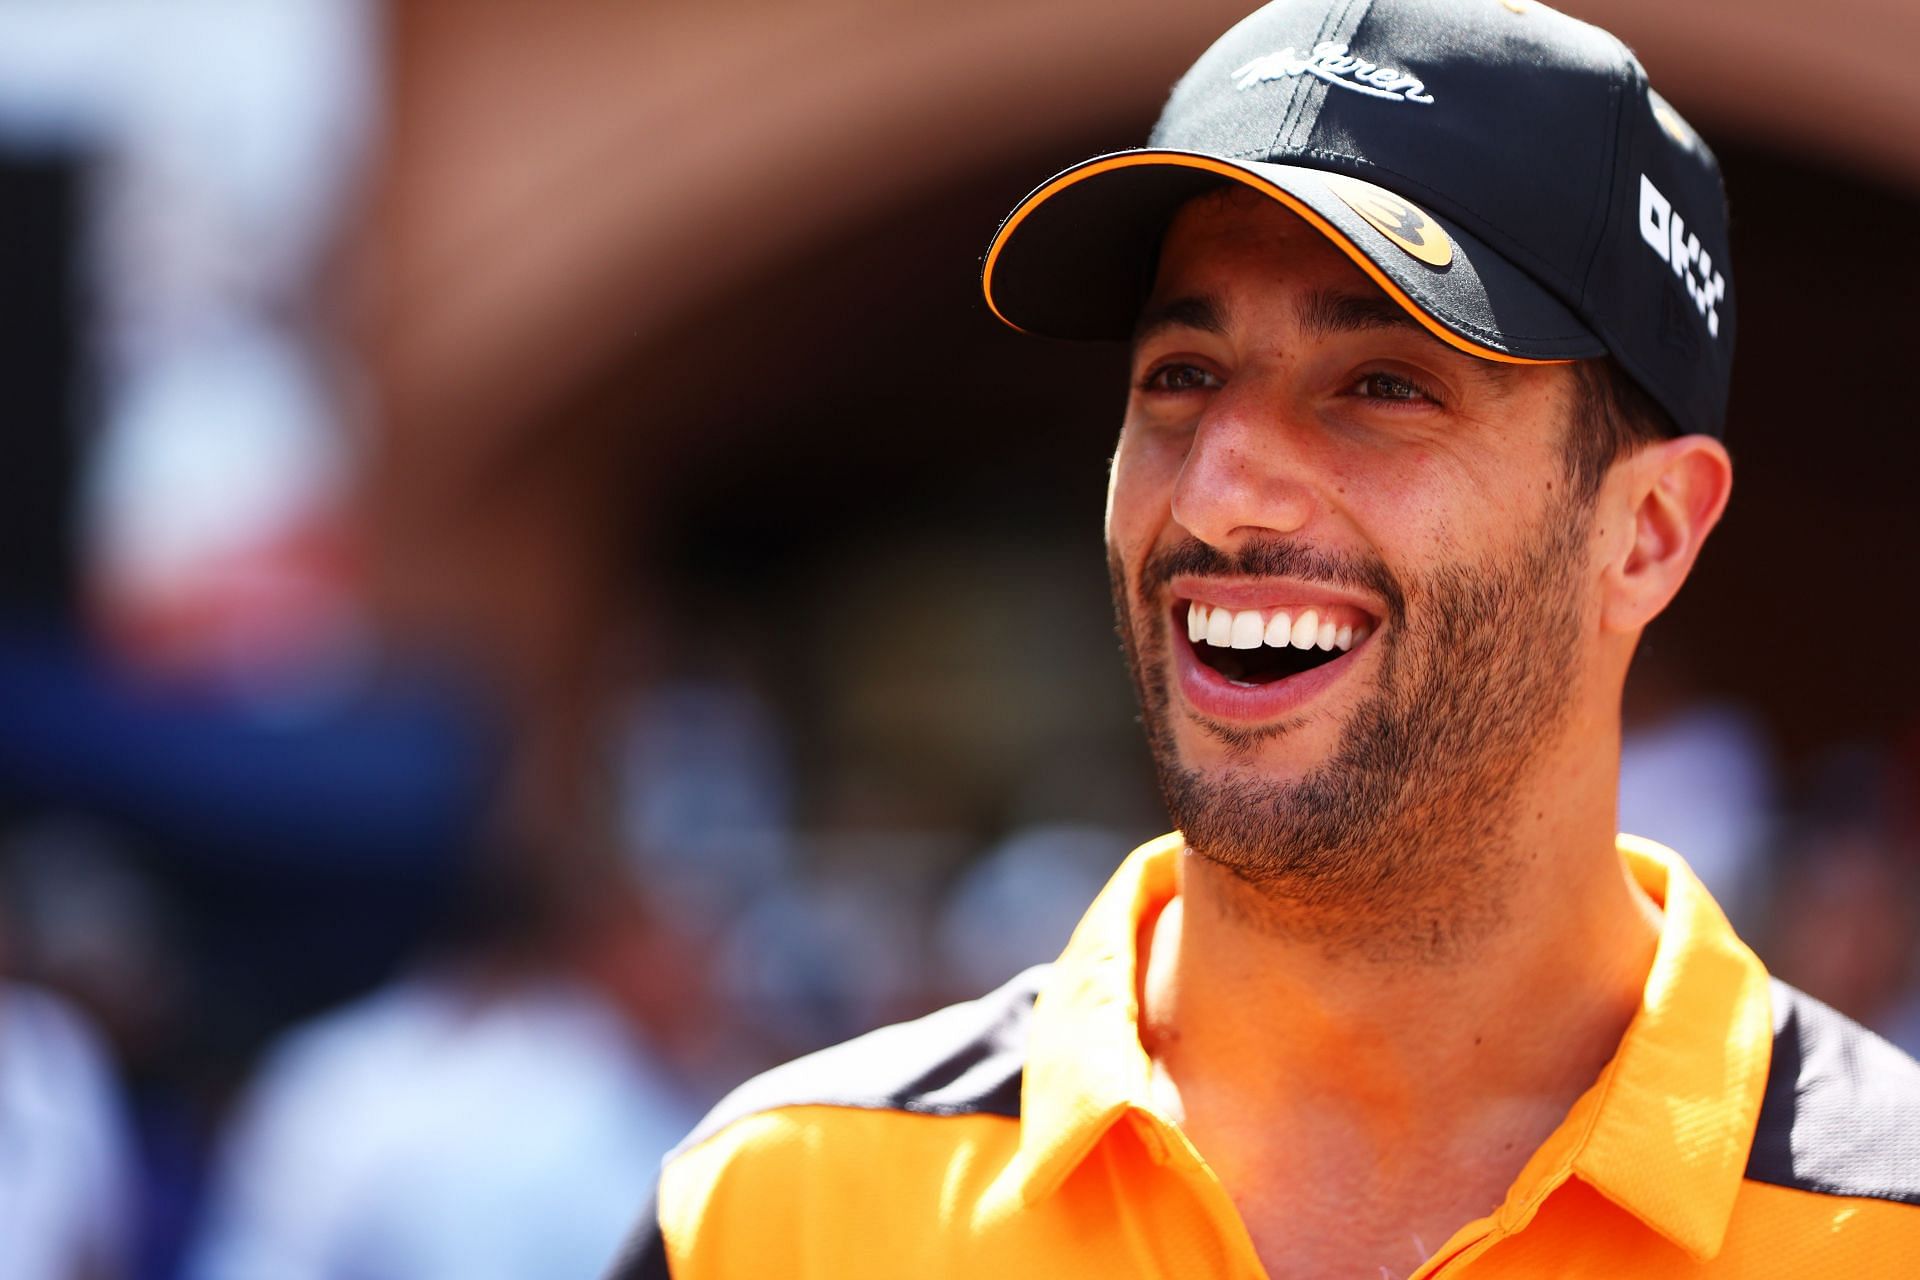 Daniel Ricciardo clapped back at the statements made by the McLaren boss about him